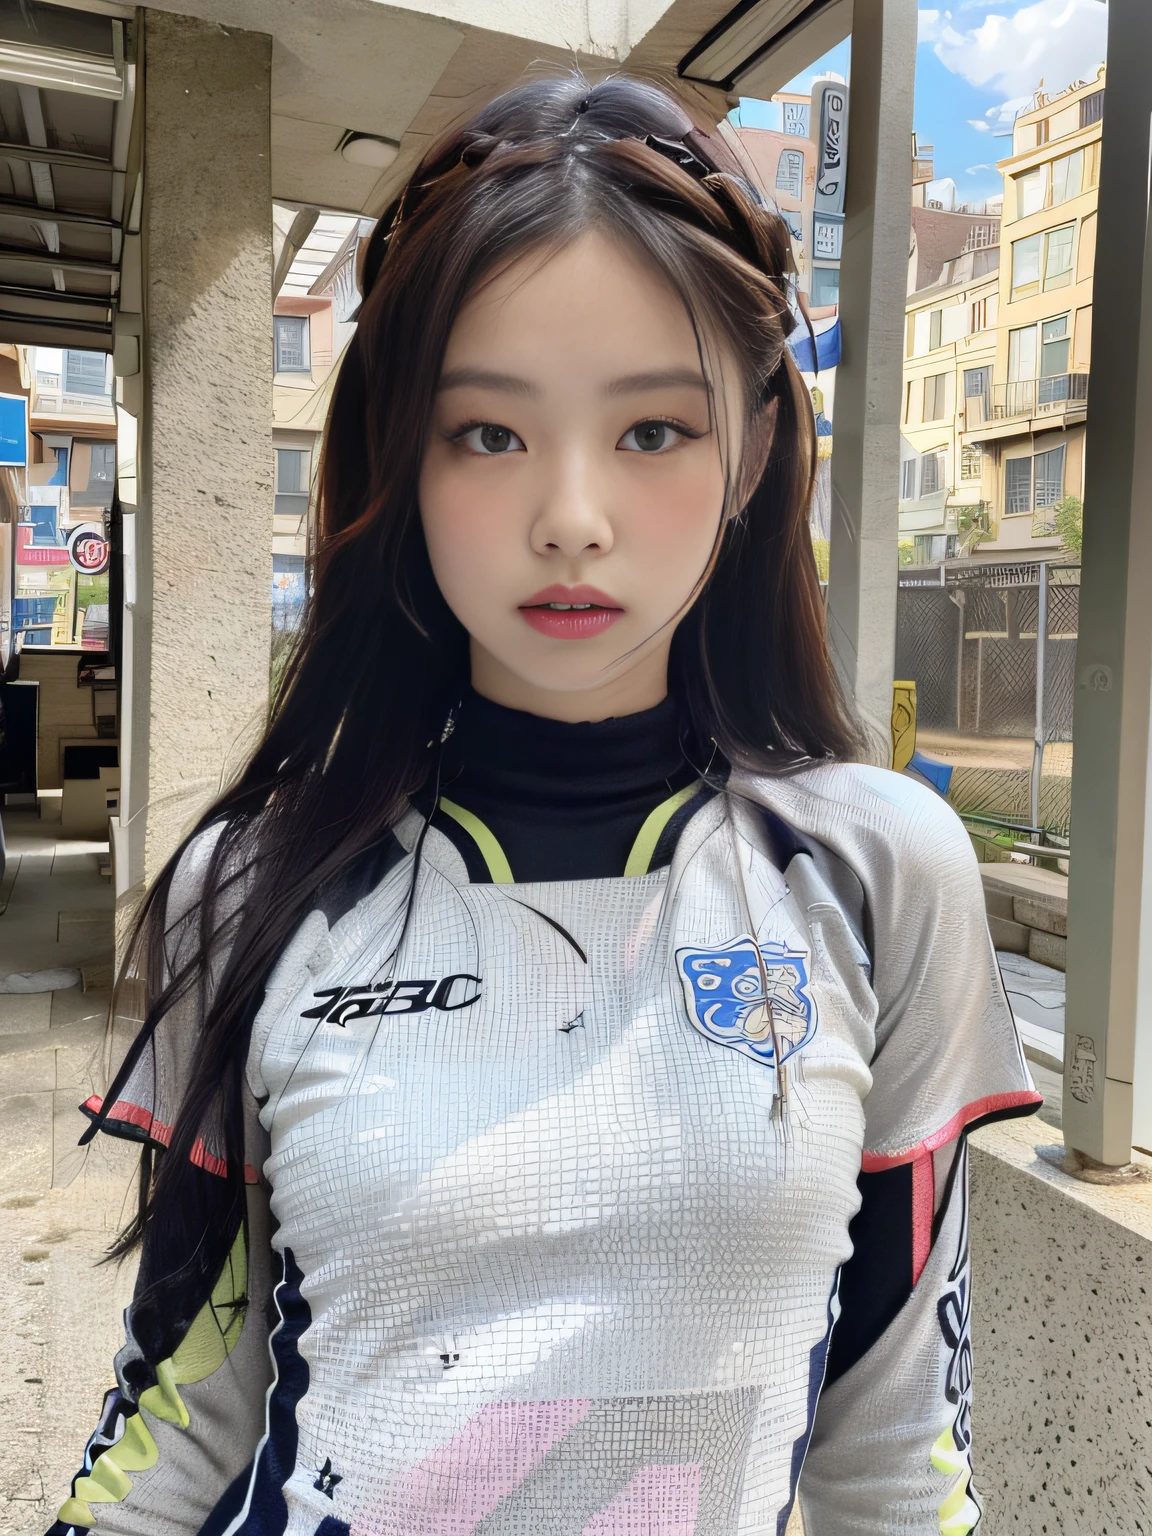 (1girl:1.3), Solo, __body-parts__, Kim Ji-ni Jennie face, wearing trendy brand, football uniform, world-weary face, cold eyes, Korean style photo photo, photography lighting, strong contrast, sunlight on the face, world-weary face, high-class sense, cold eyes, feminine, cement gray background, 8k resolution image, intricate symmetrical details. The whole picture goes forward, mainly a woman standing all over her body, with smooth movements and a complete picture.